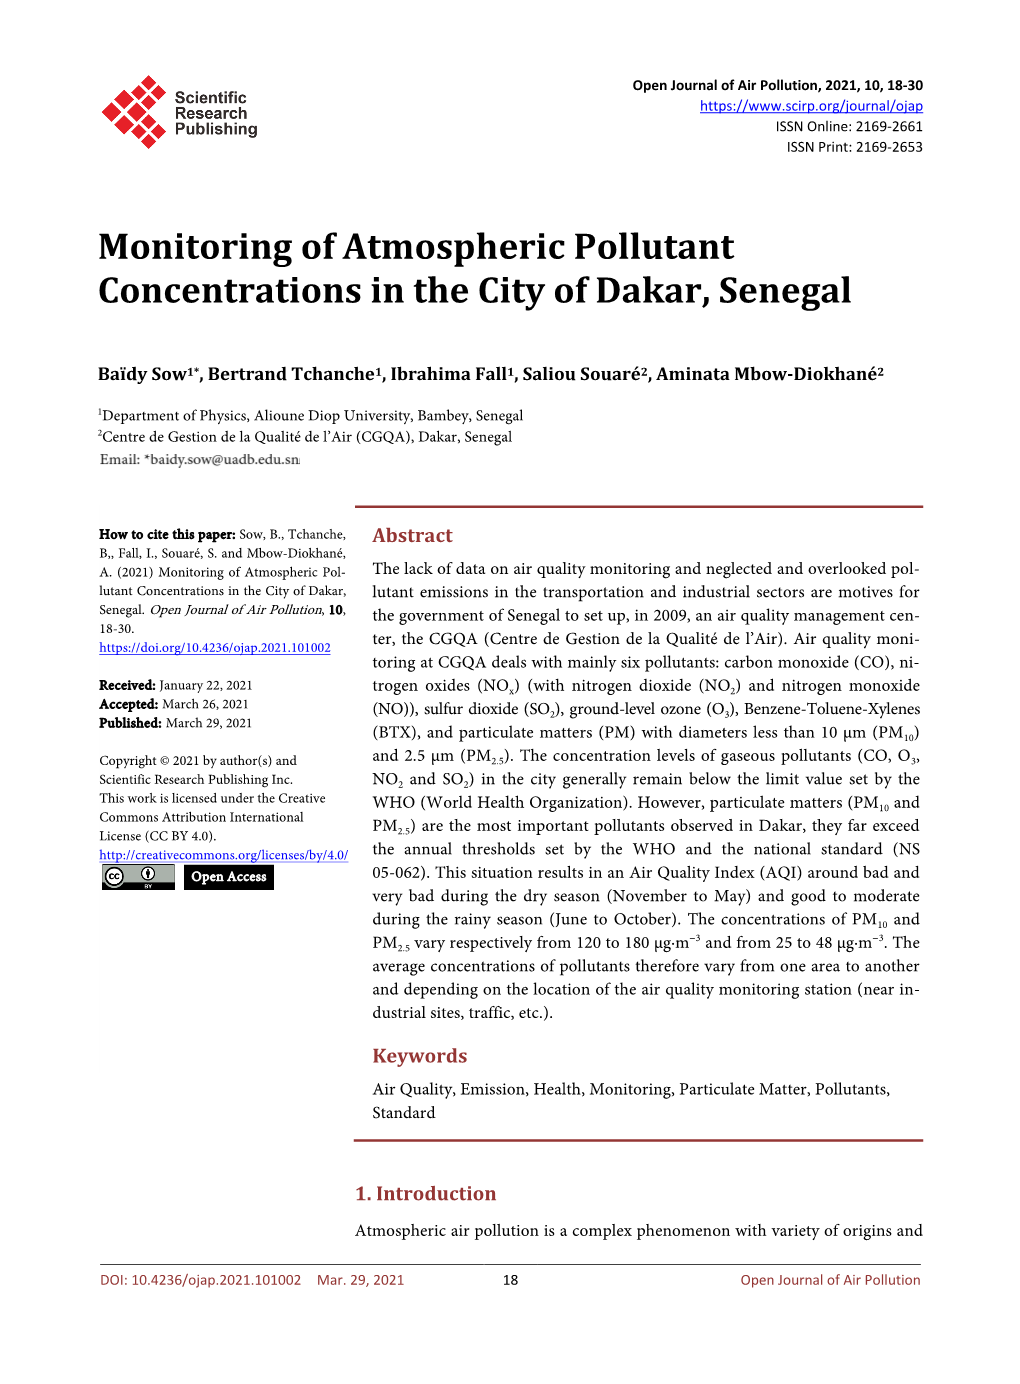 Monitoring of Atmospheric Pollutant Concentrations in the City of Dakar, Senegal